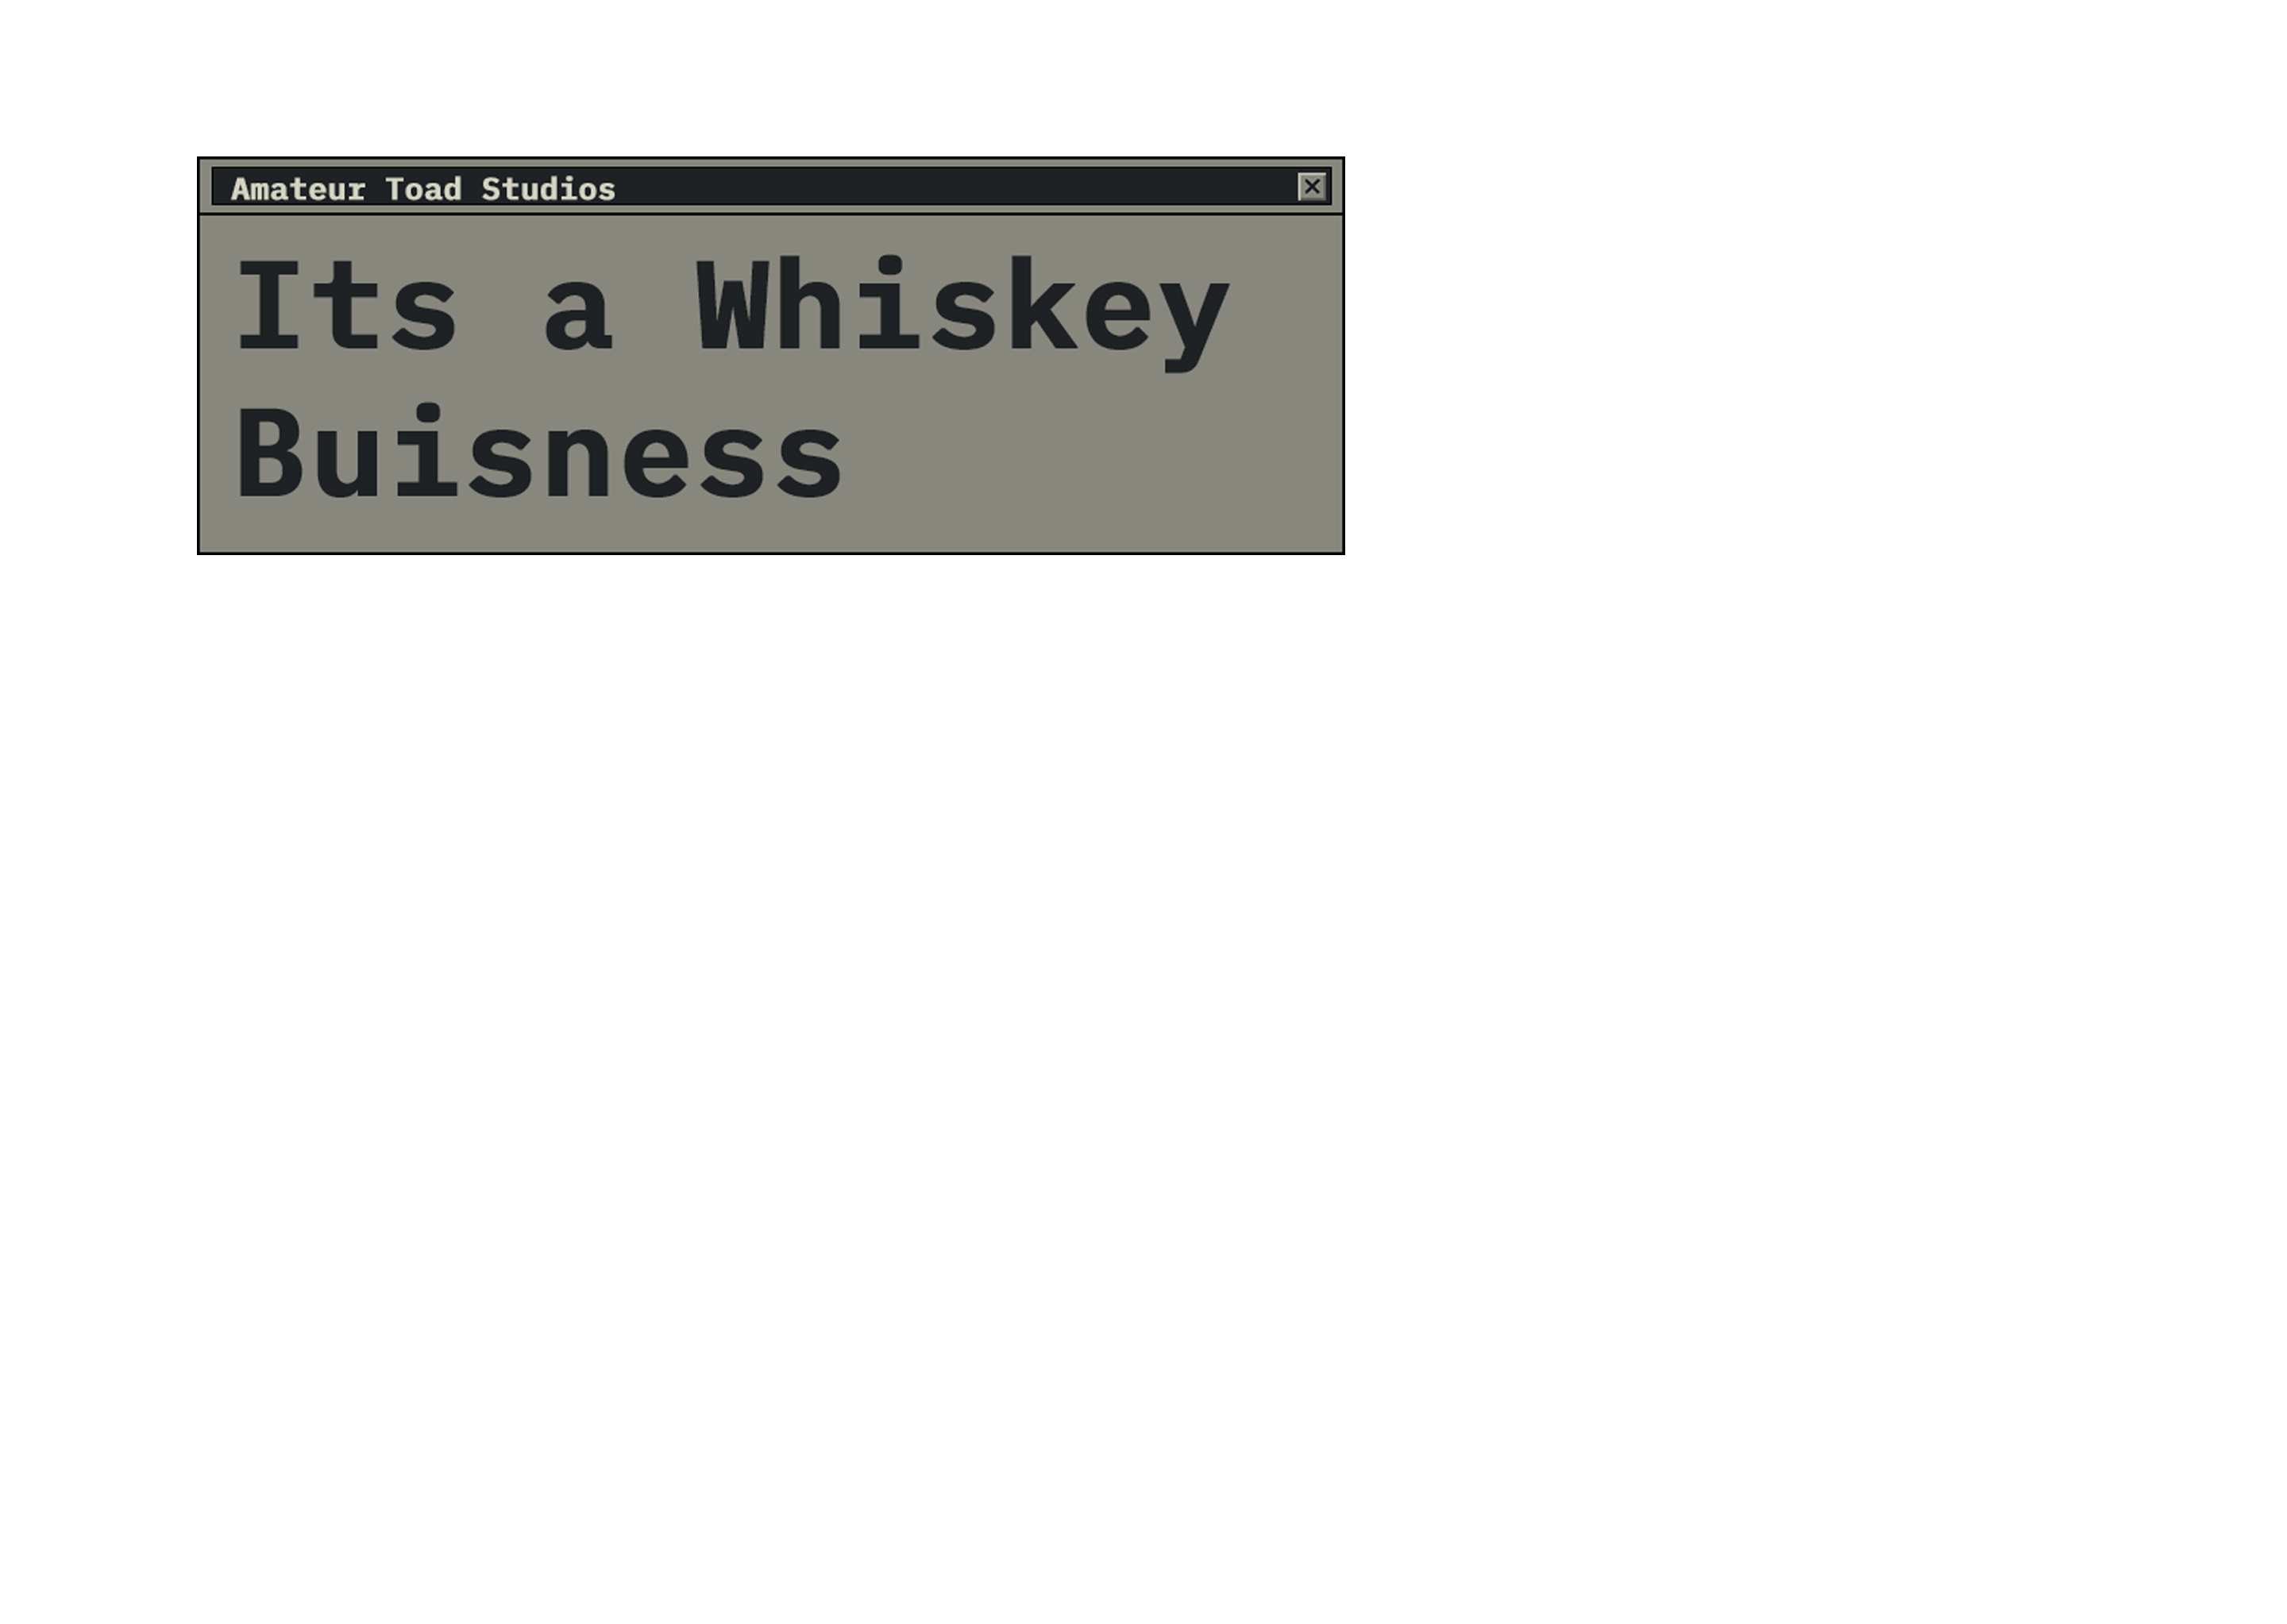 Its a whisky buisness